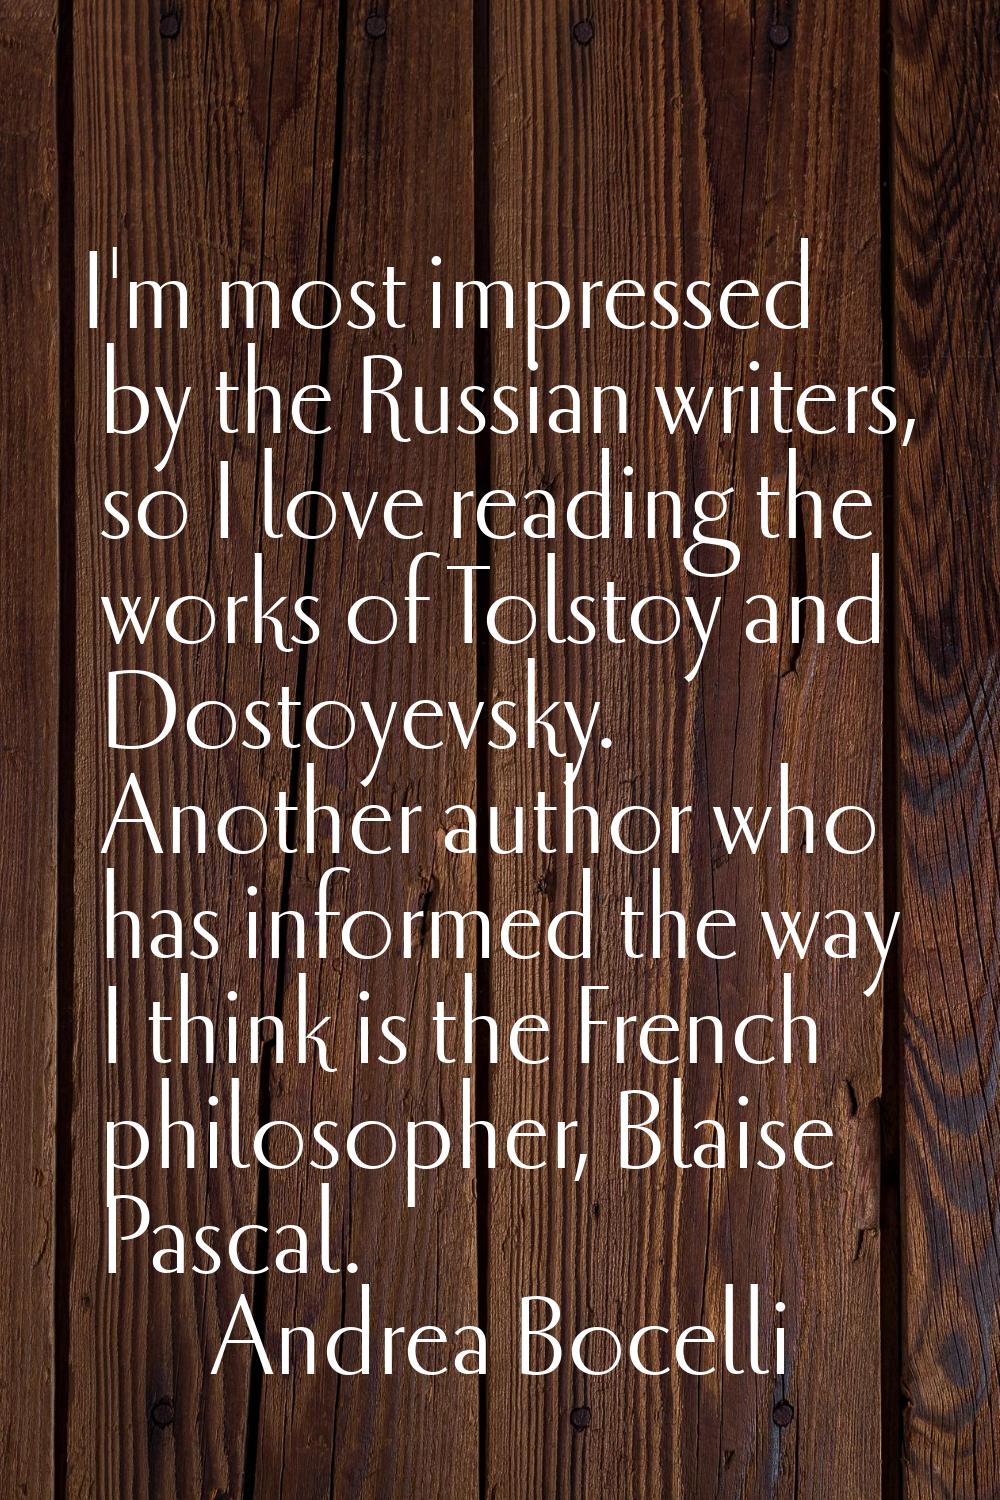 I'm most impressed by the Russian writers, so I love reading the works of Tolstoy and Dostoyevsky. 